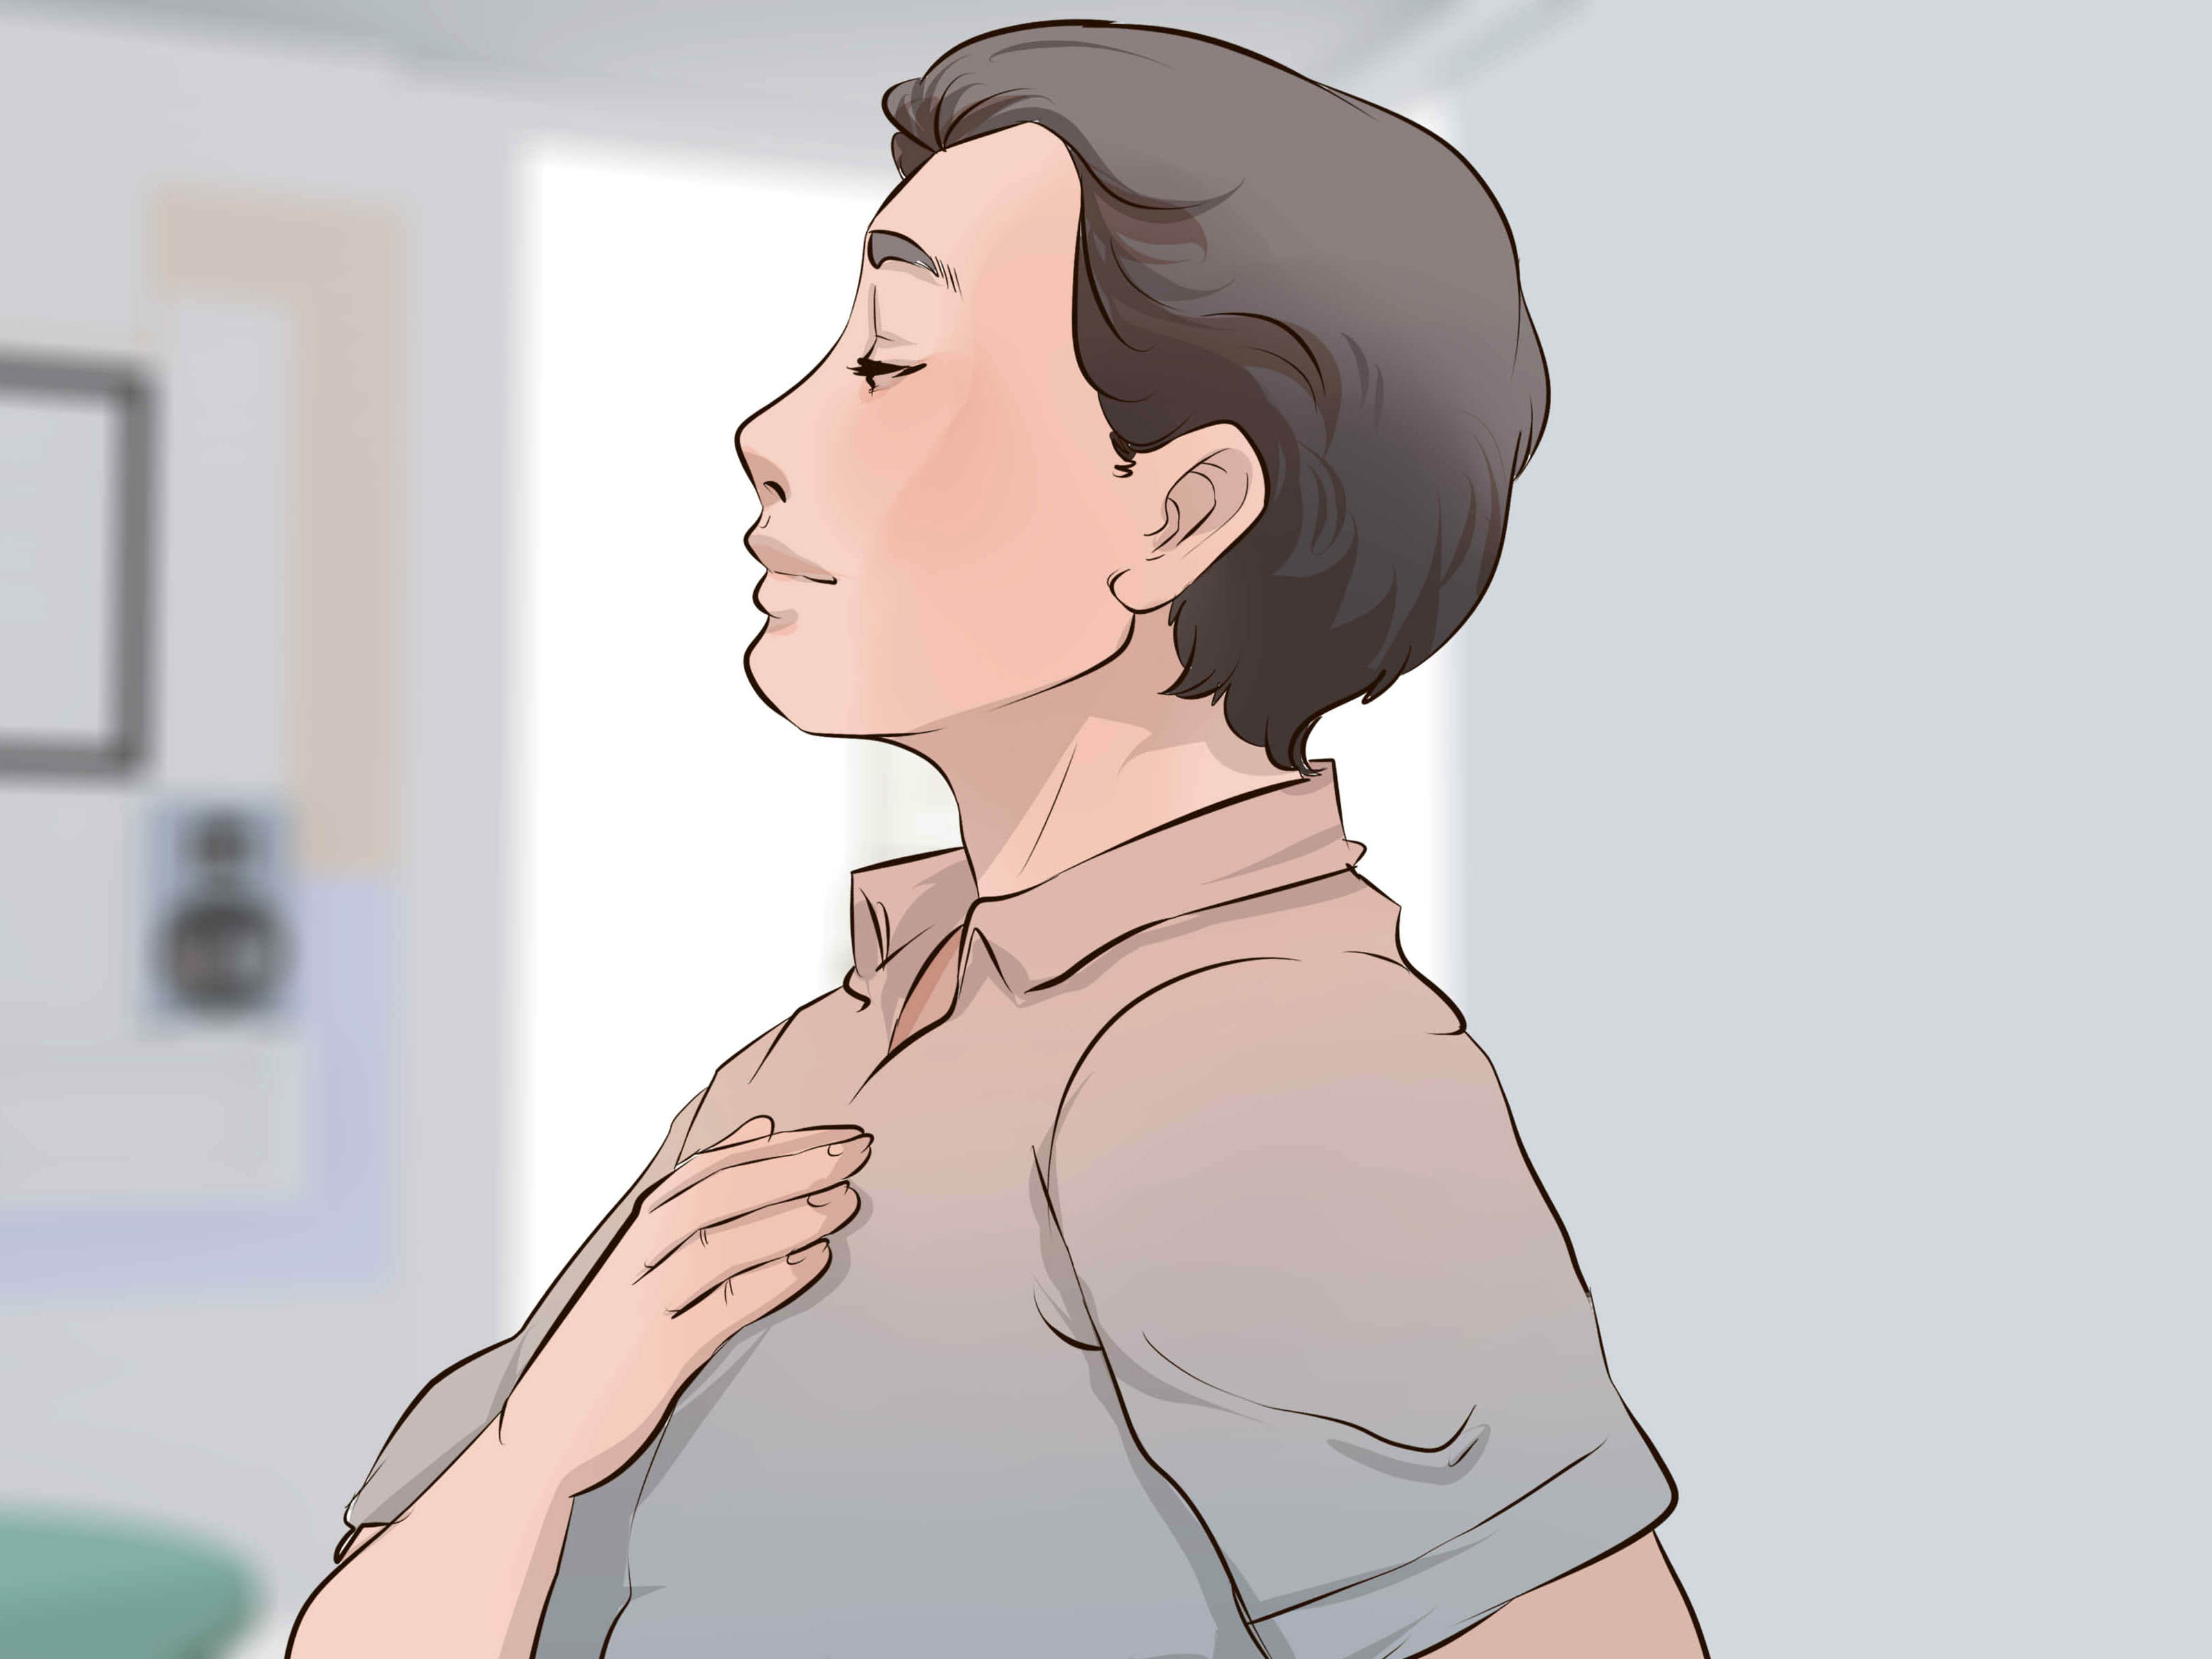 How to get your girlfriend to kiss you